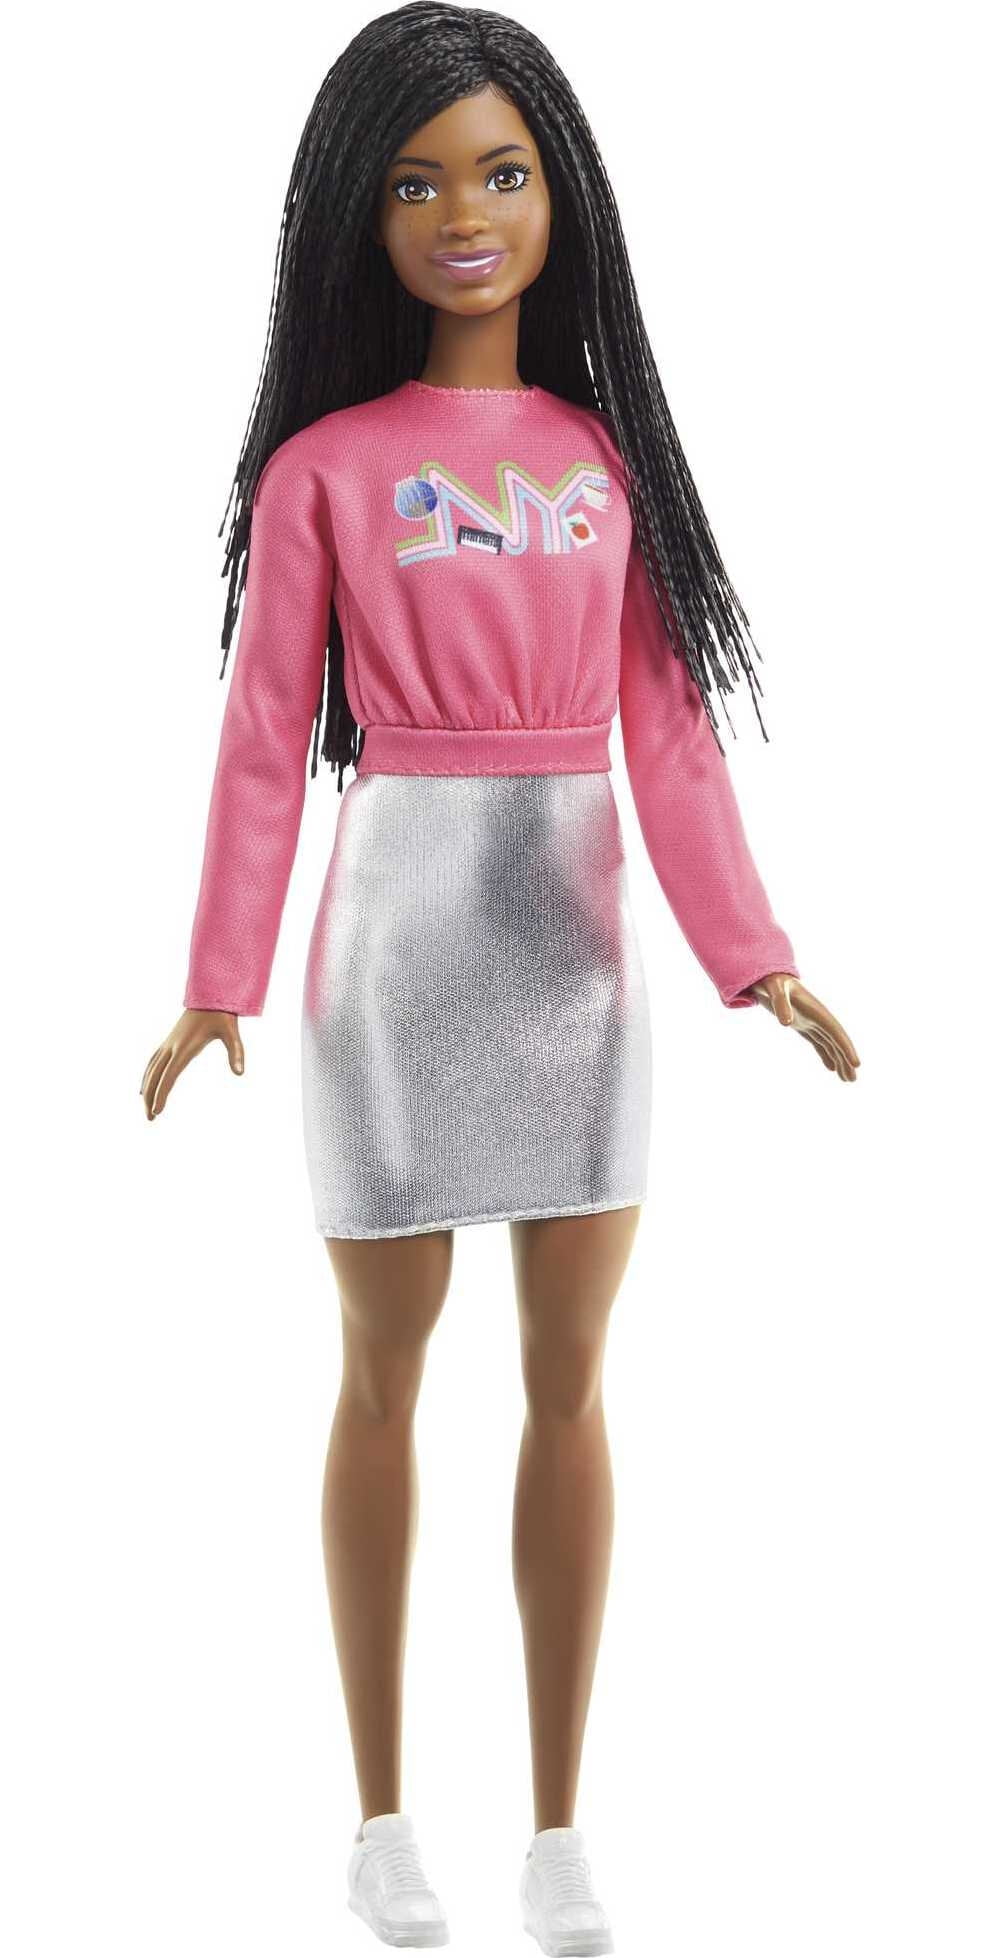 Barbie It Takes Two Brooklyn Doll with Braided Hair, Pink NYC Shirt ...